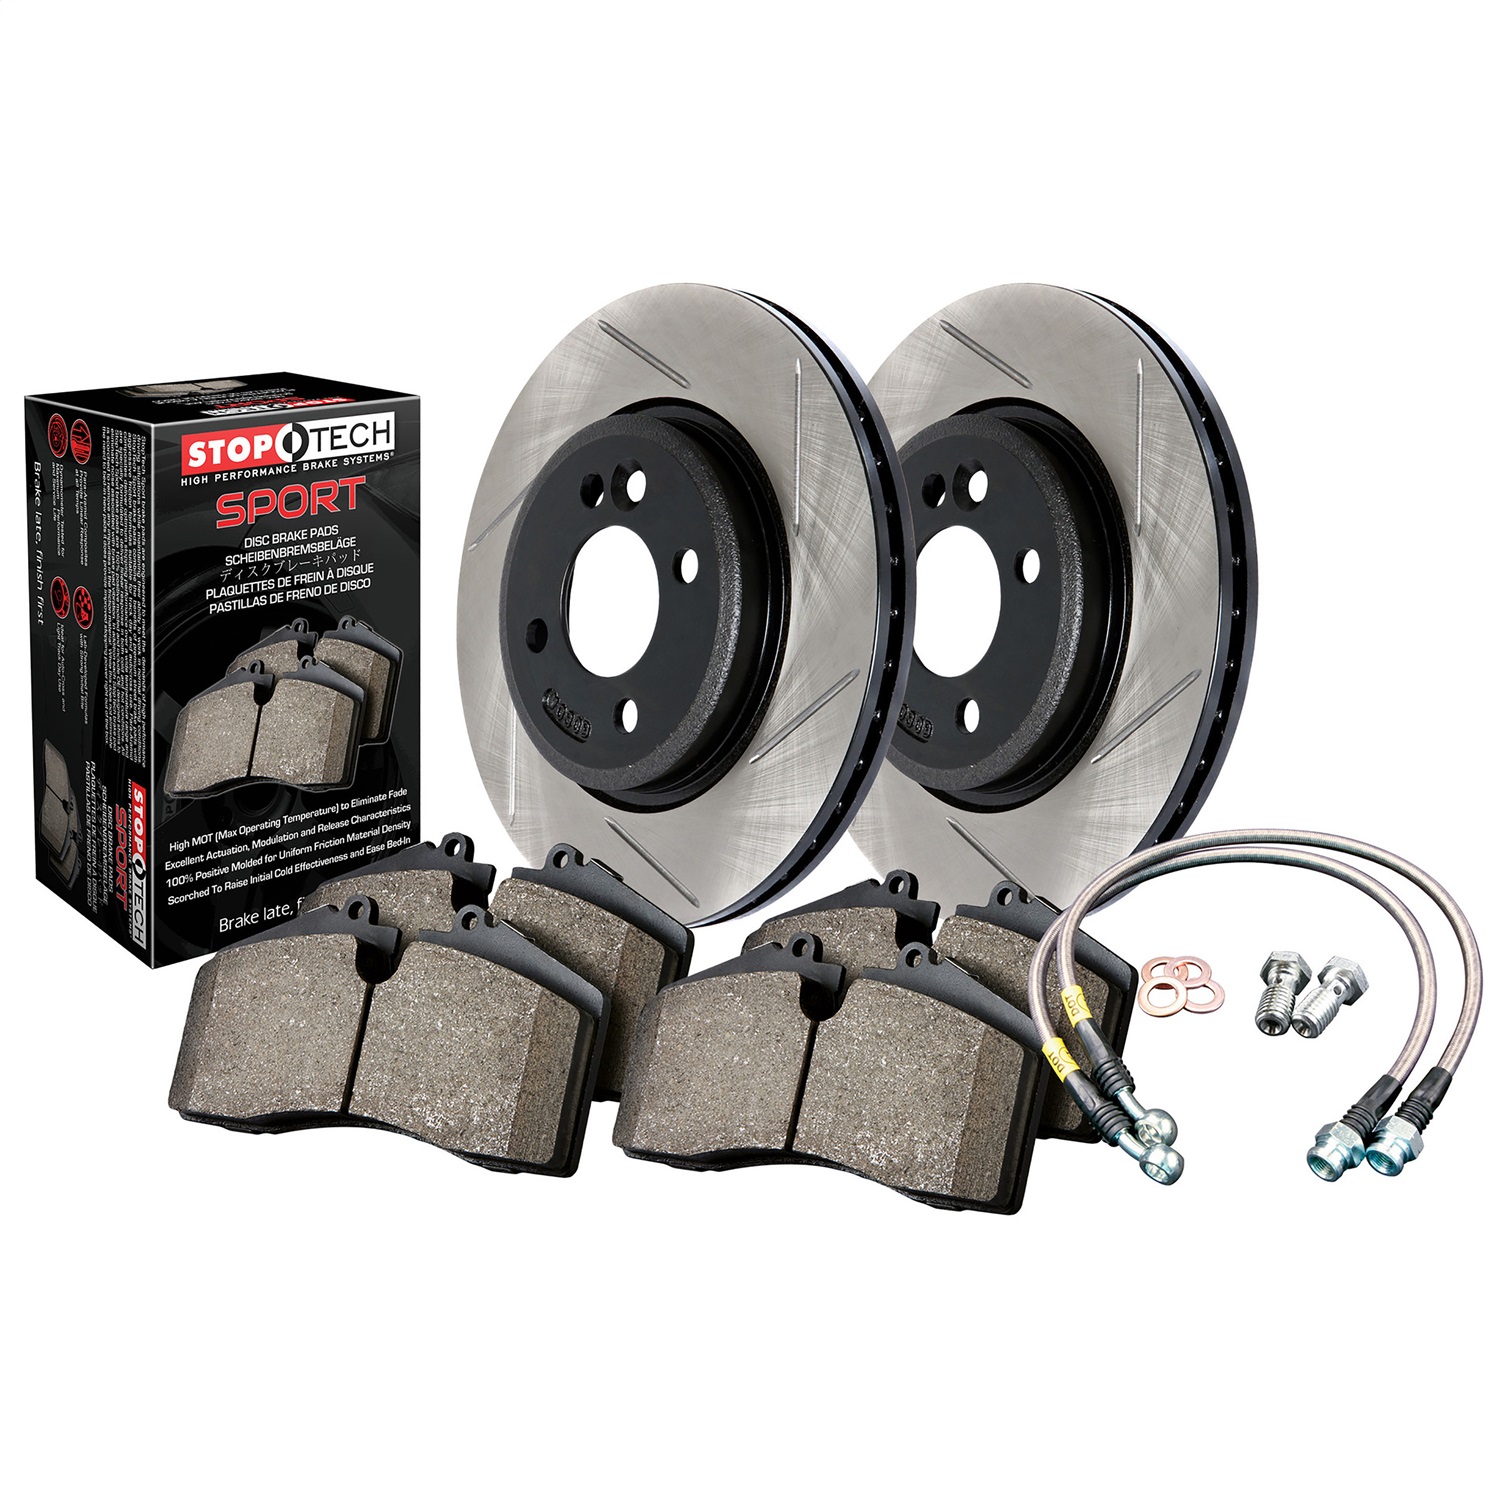 StopTech 977.33052R Sport Disc Brake Kit w/Slotted Rotors